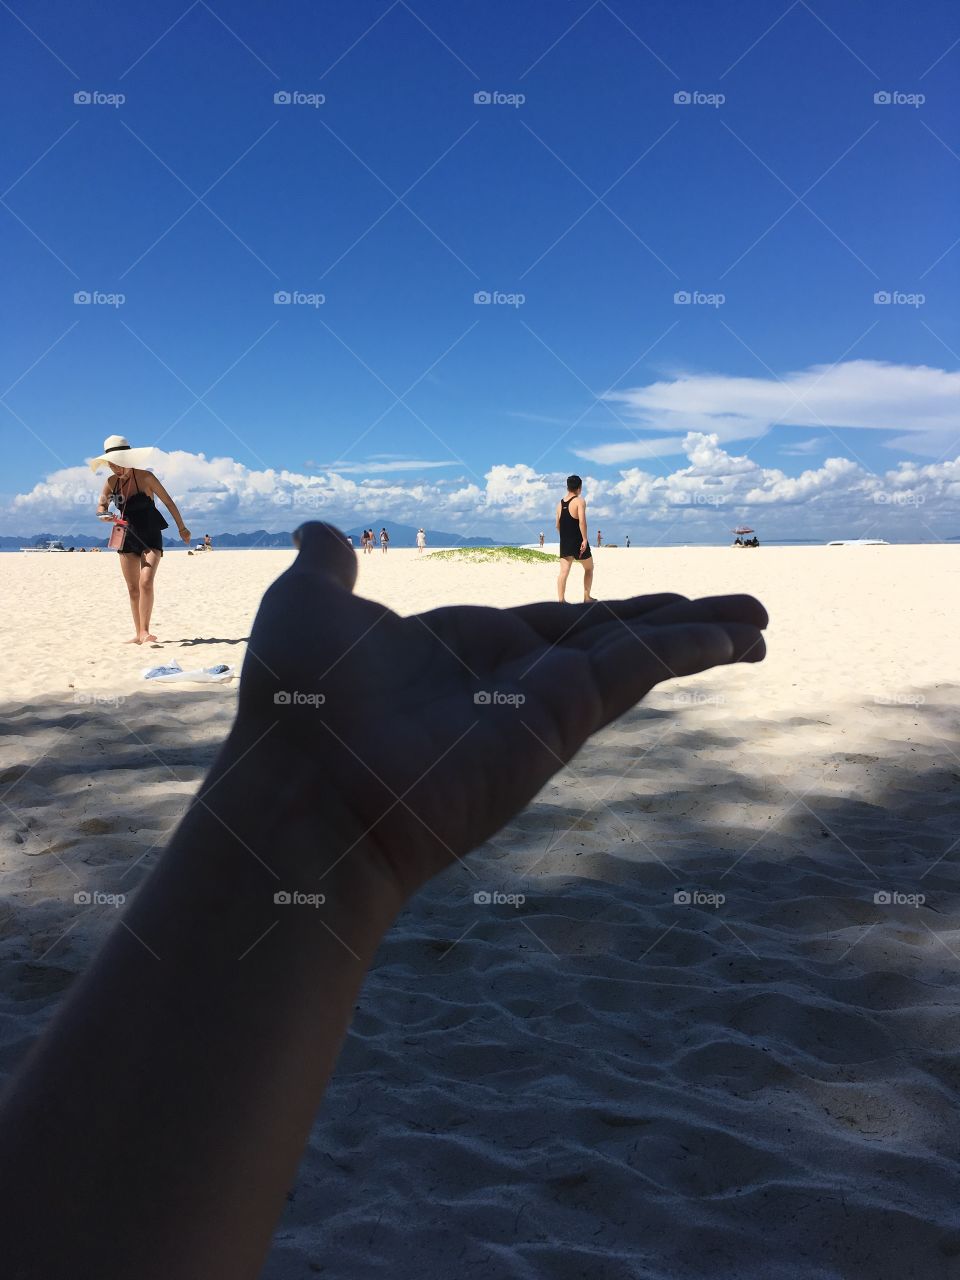 A little perspective fun on white sand beach